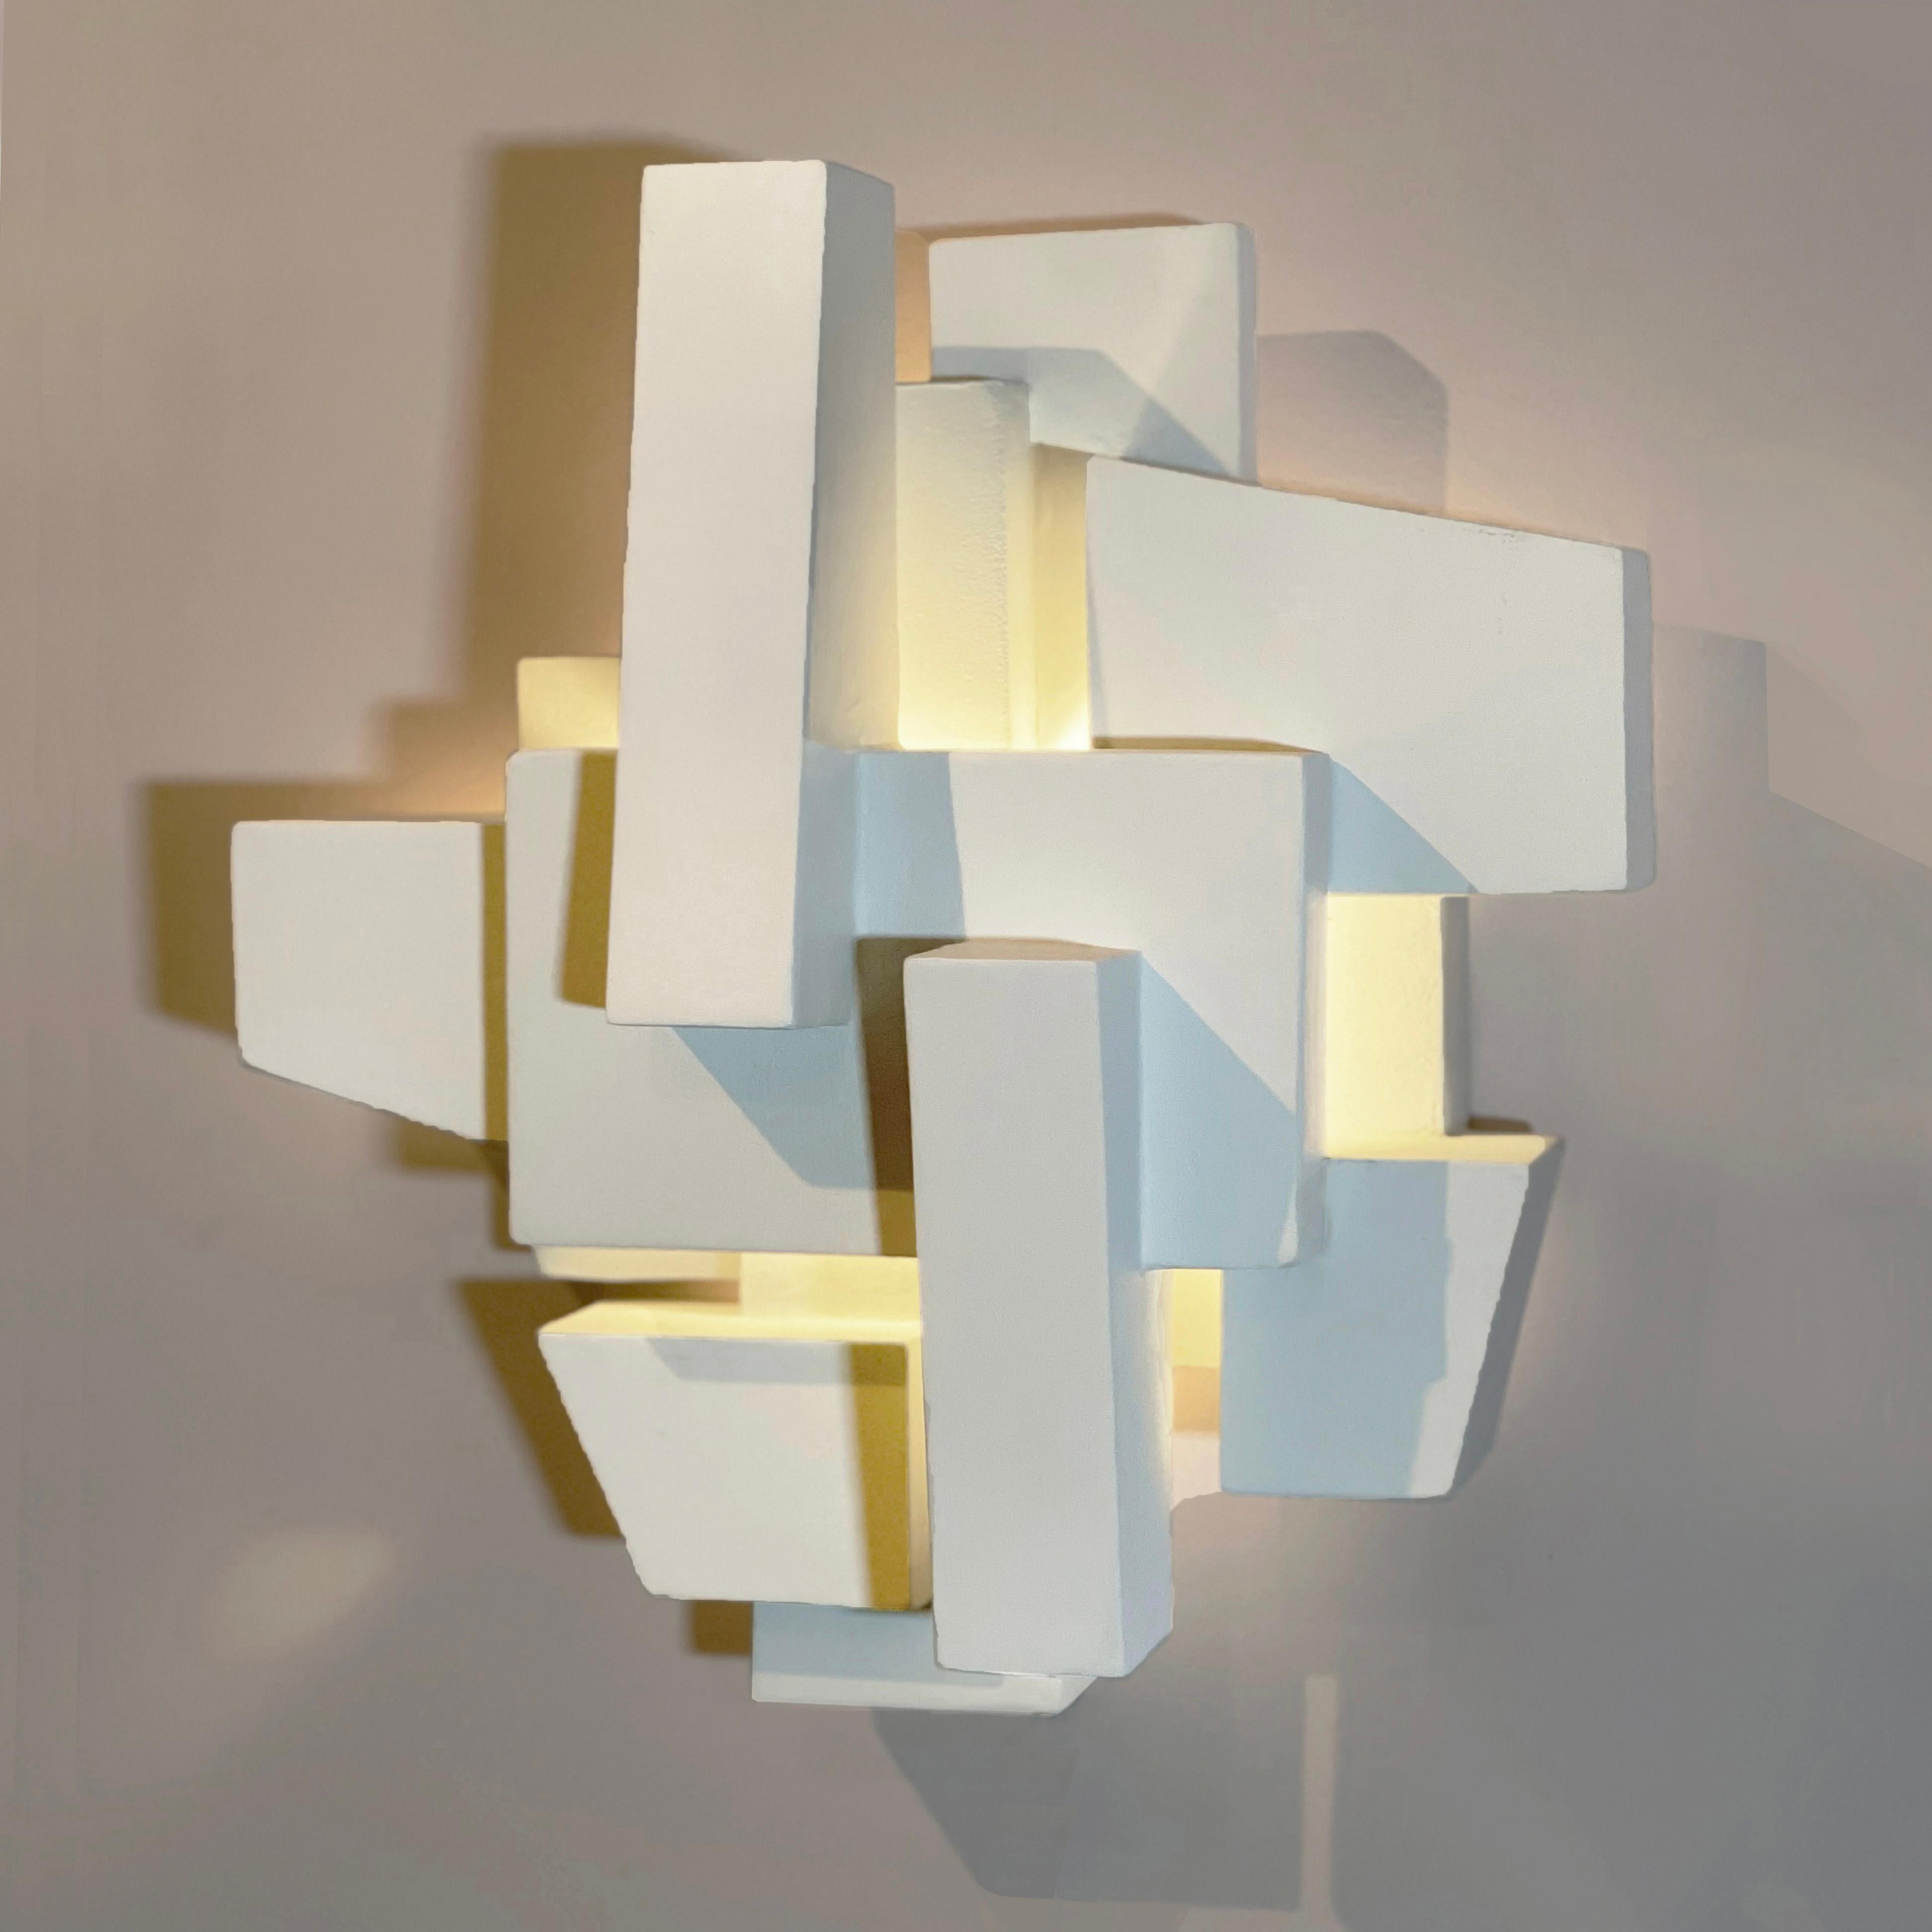 Femke wall sconce by Daniel Schneiger
Dimensions: D 31 x W 36 x H 15 cm
Materials: Wood and resin
Custom finishes available.

All our lamps can be wired according to each country. If sold to the USA it will be wired for the USA for